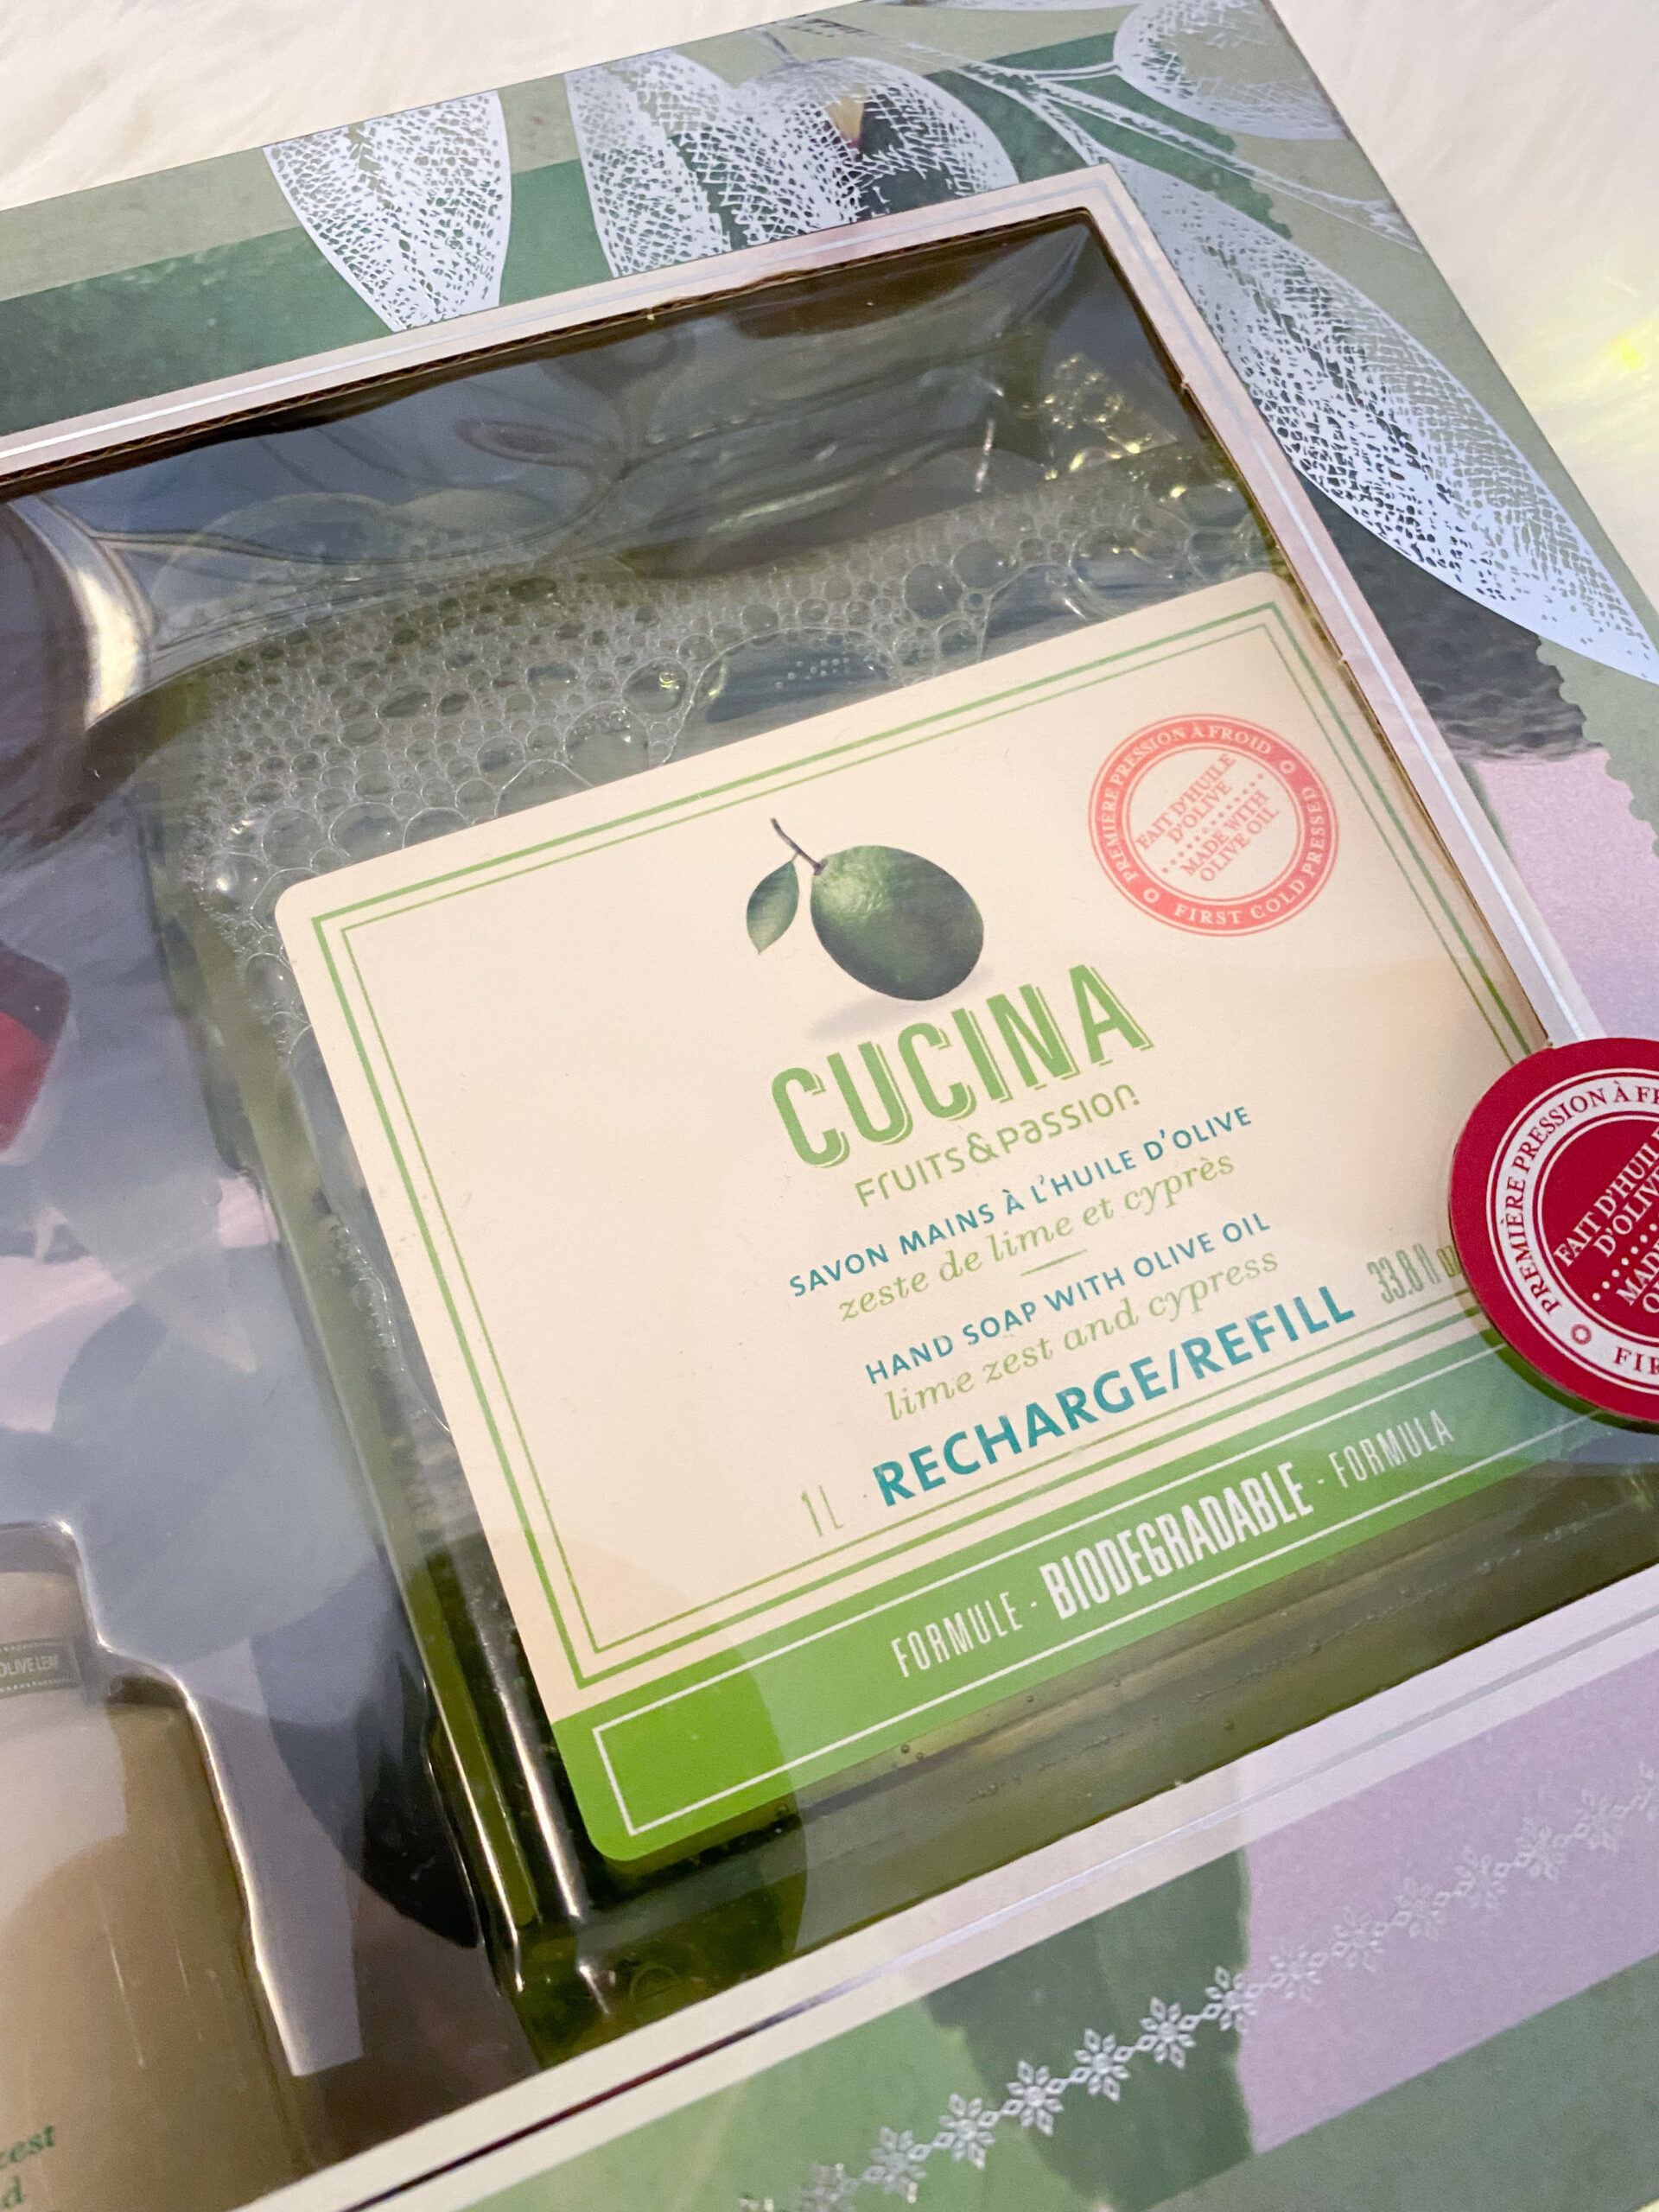 Fruits & Passion CUCINA holiday gift guide for her on Livin' Life with Style 